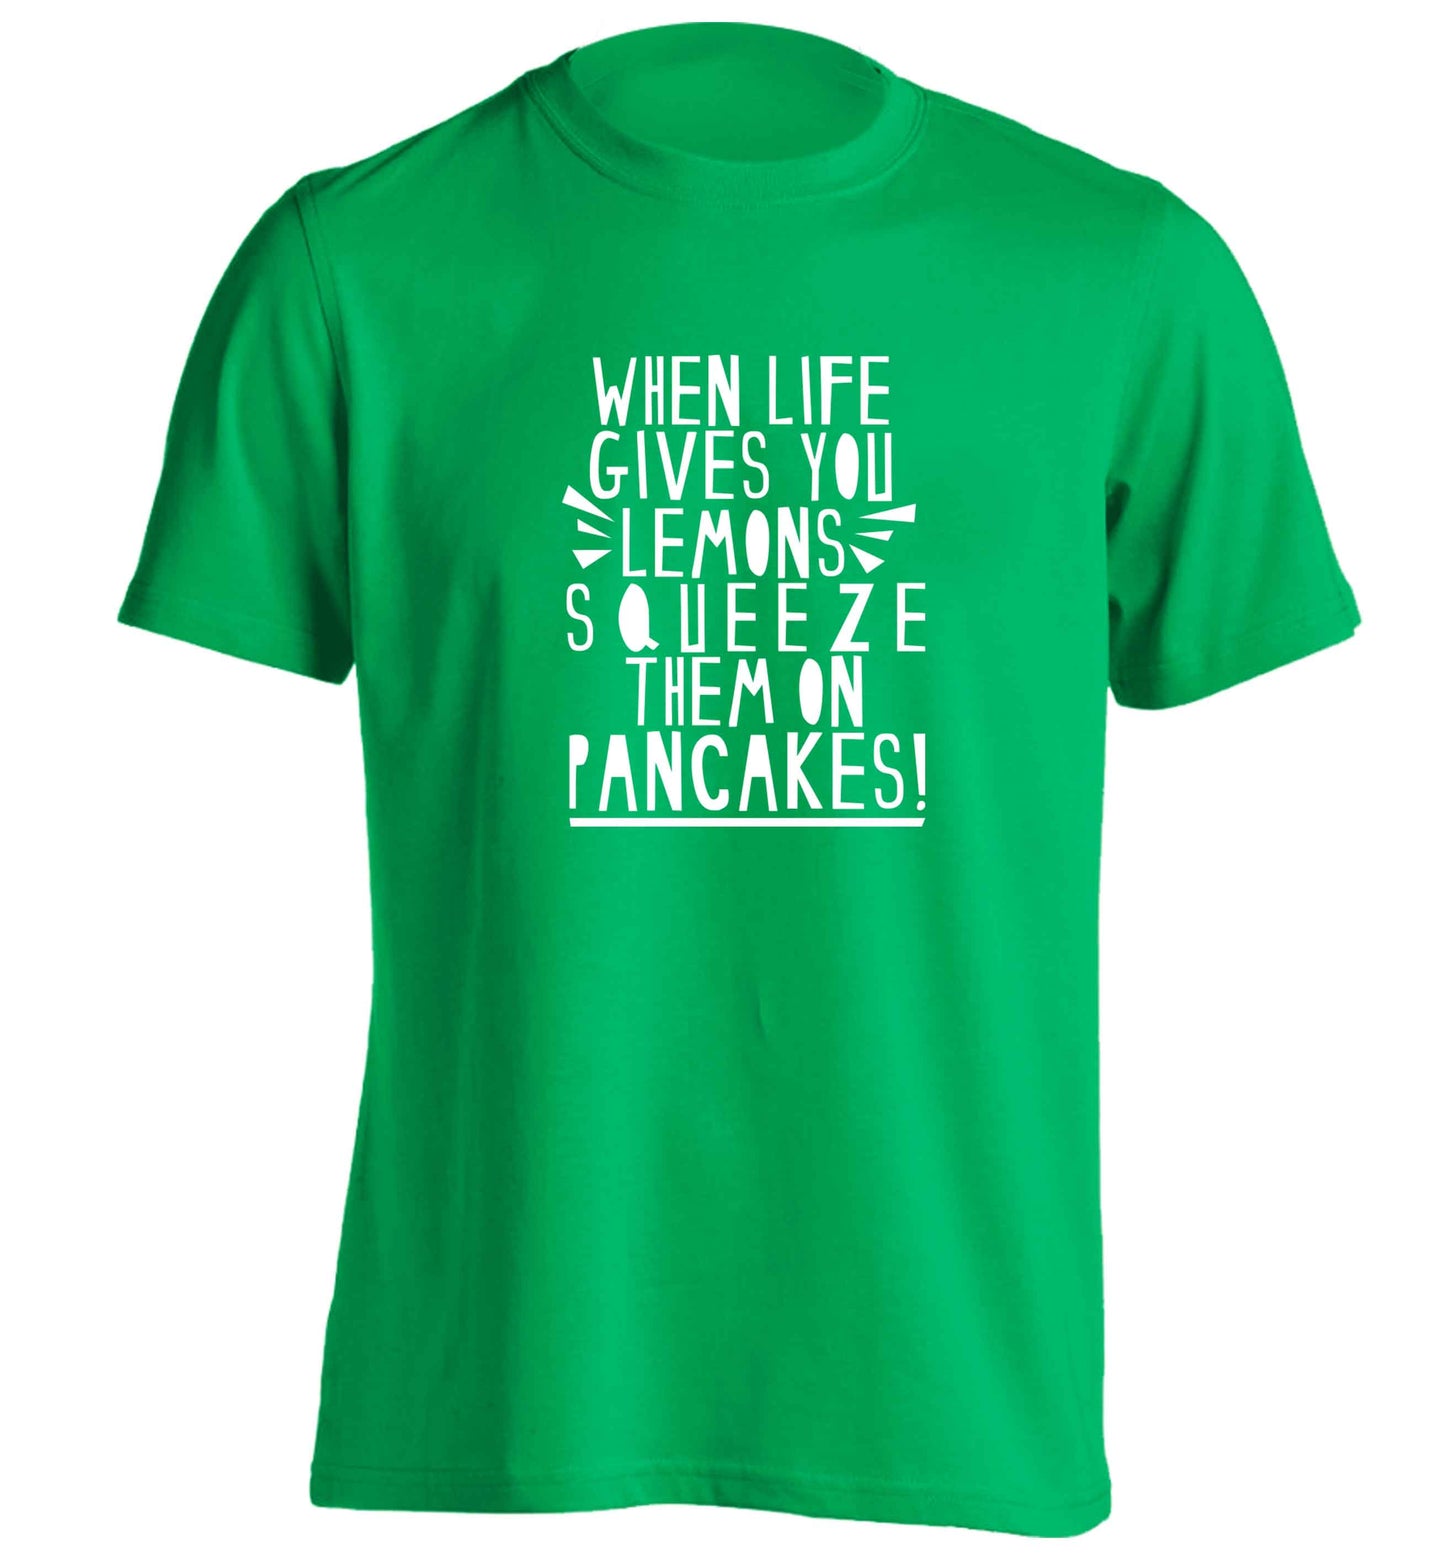 When life gives you lemons squeeze them on pancakes! adults unisex green Tshirt 2XL